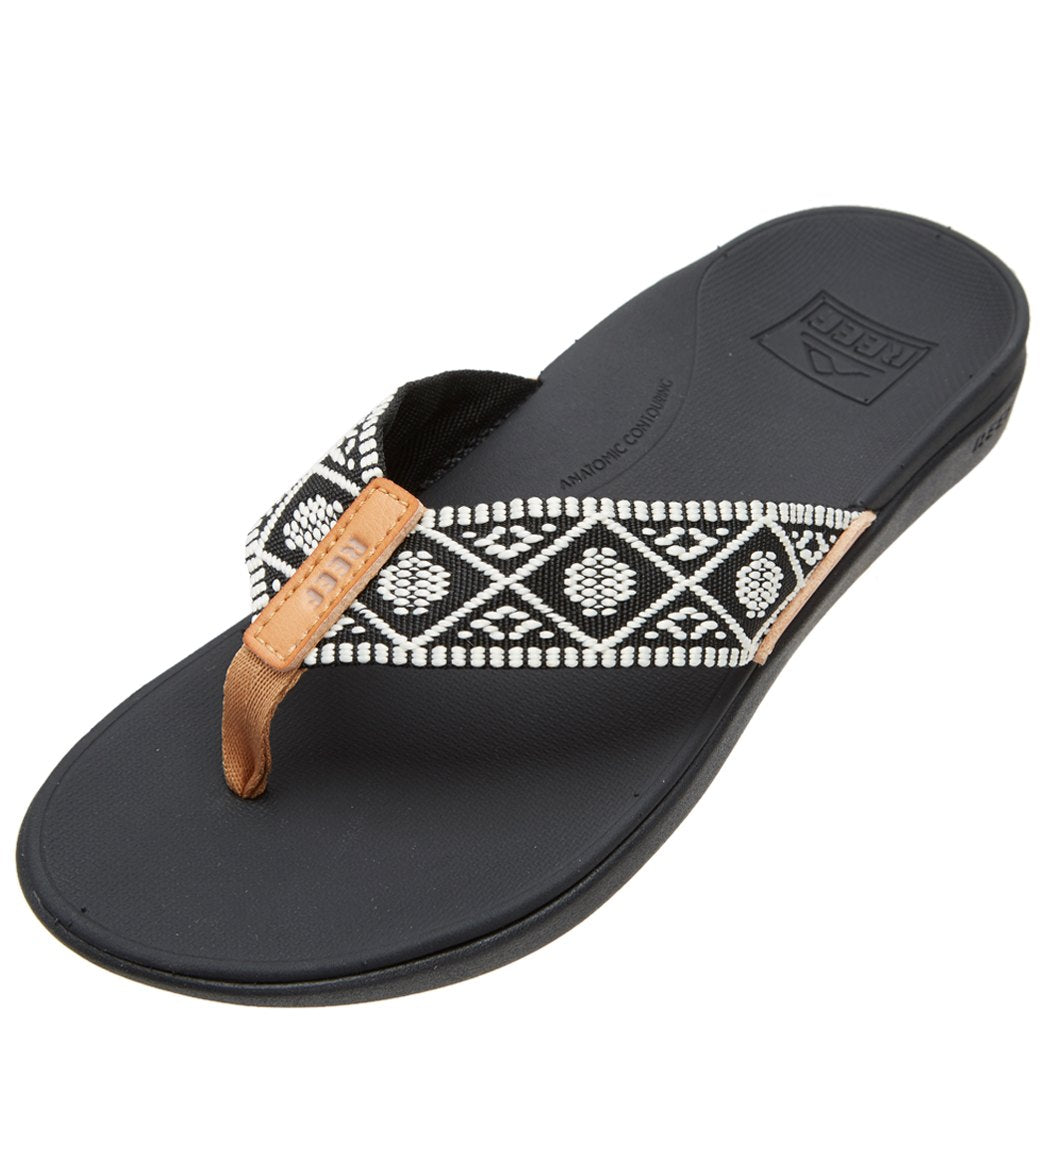 Reef Ortho-Bounce Woven Flip Flop at SwimOutlet.com